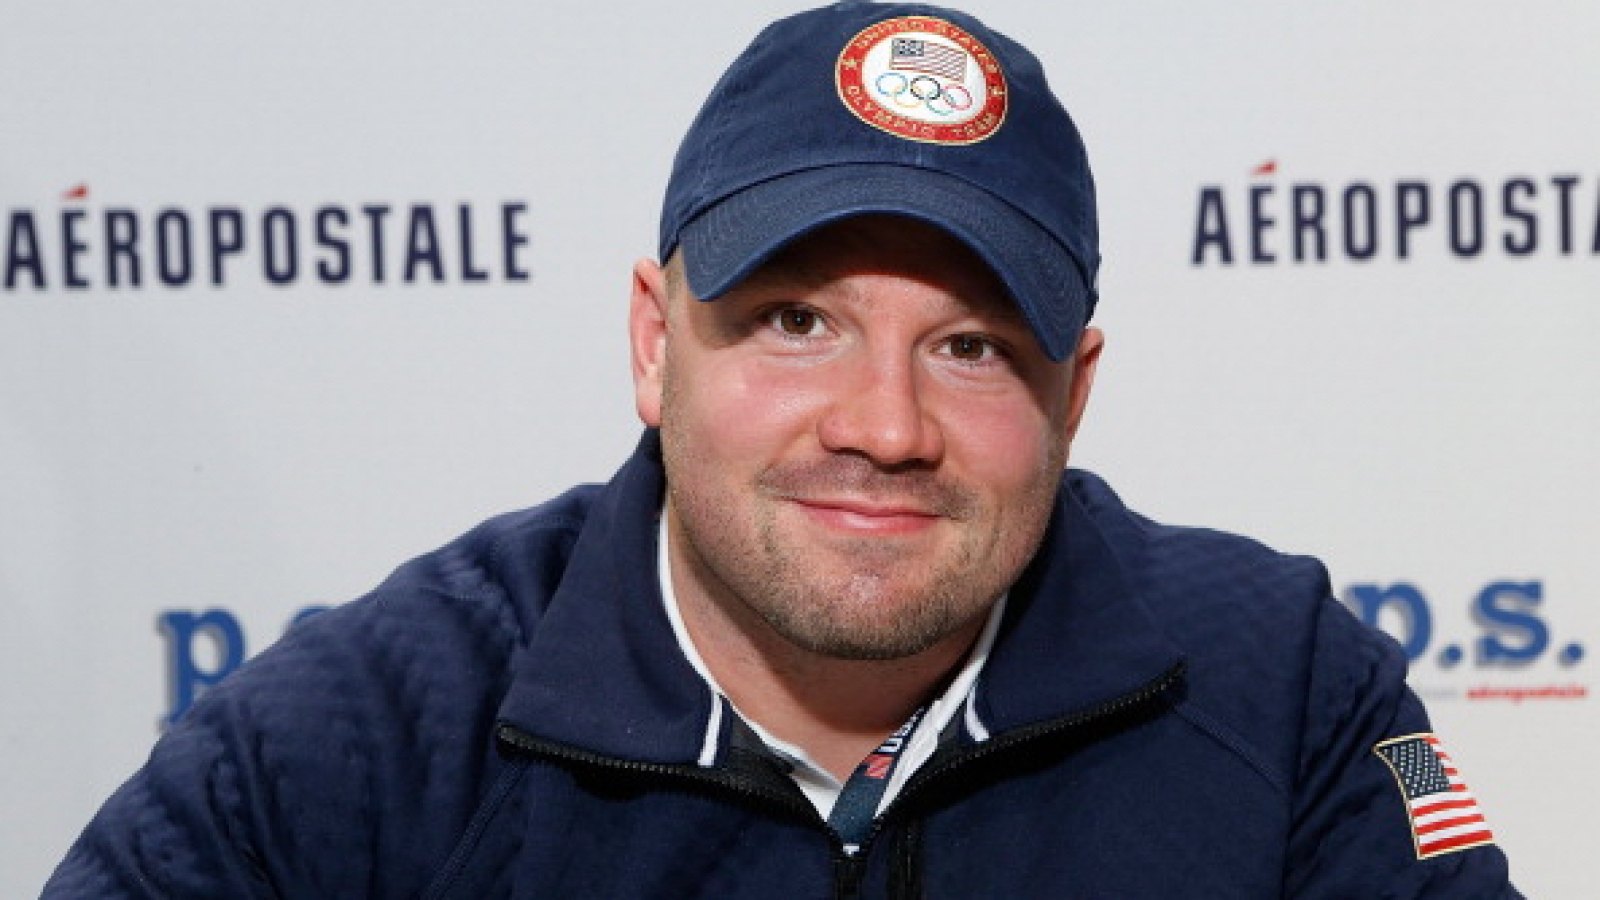 Olympic Bobsled Gold Medalist Steven Holcomb Dead at 37